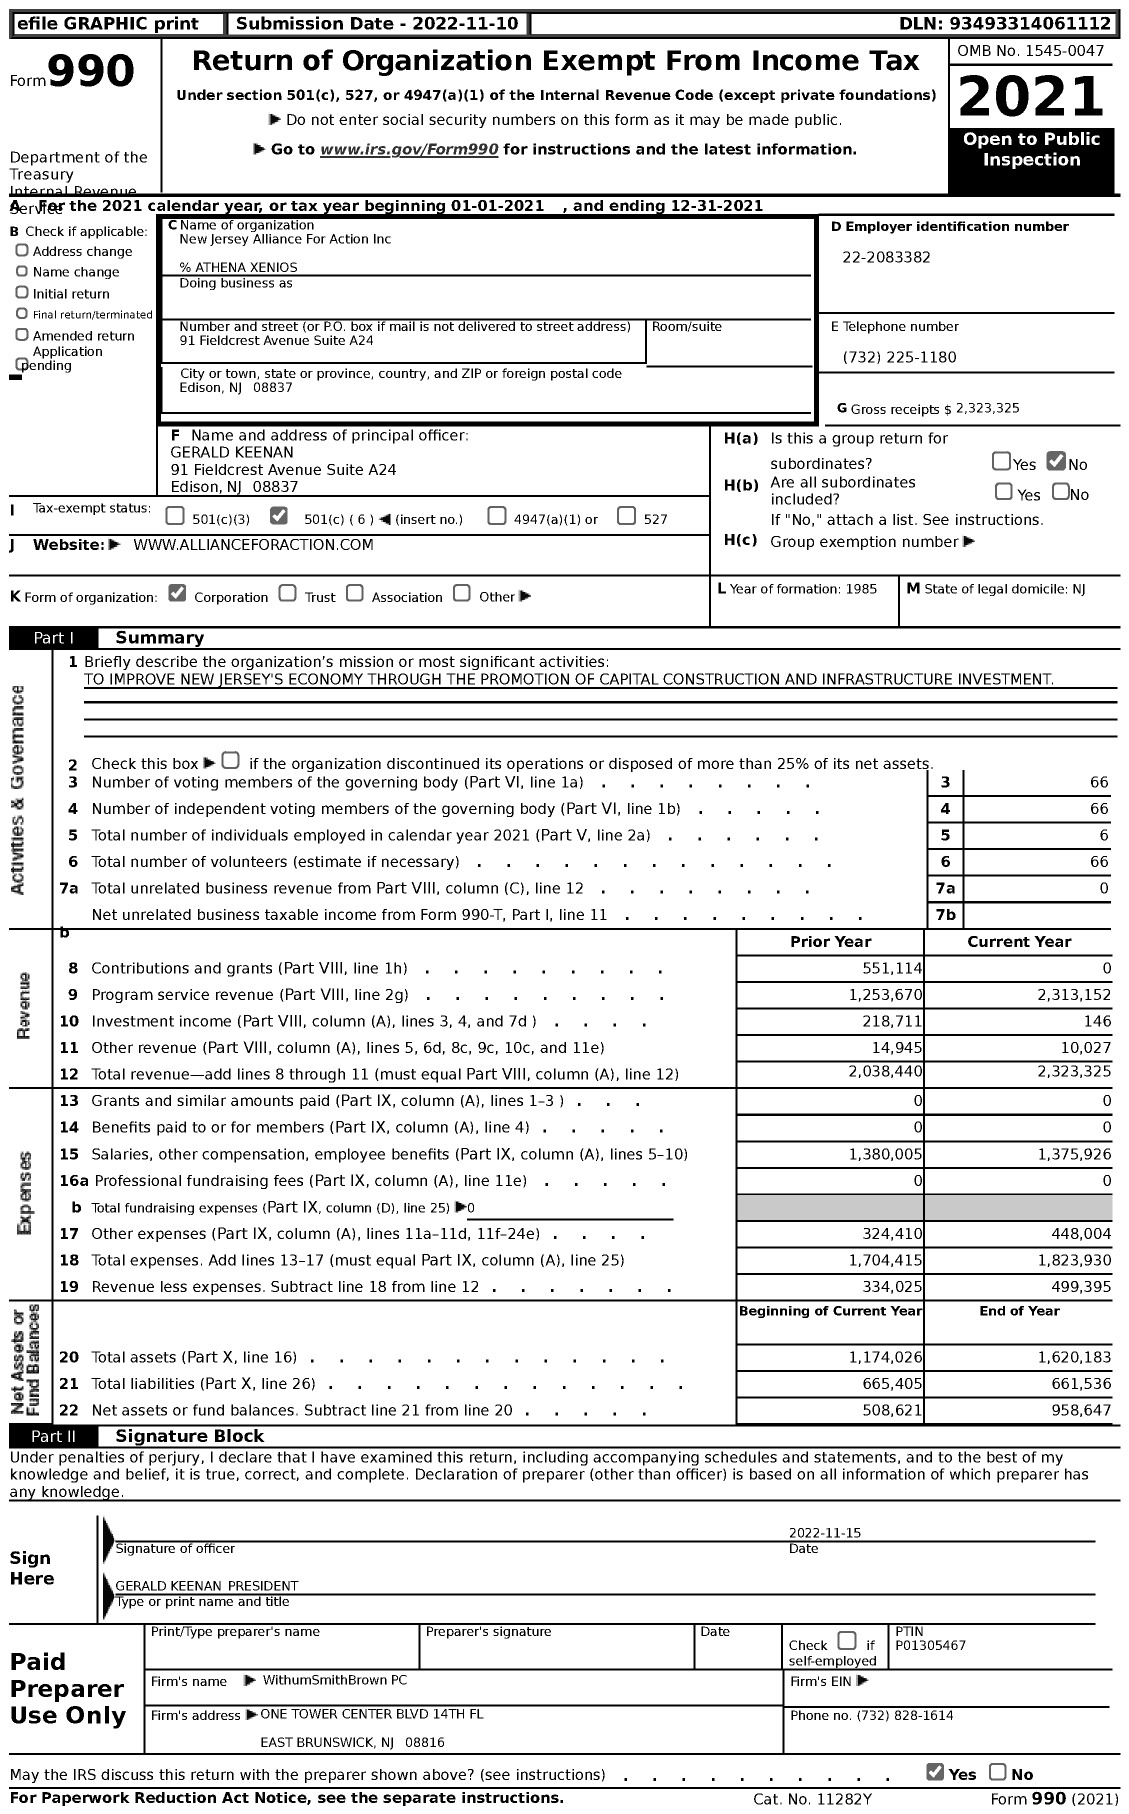 Image of first page of 2021 Form 990 for New Jersey Alliance For Action